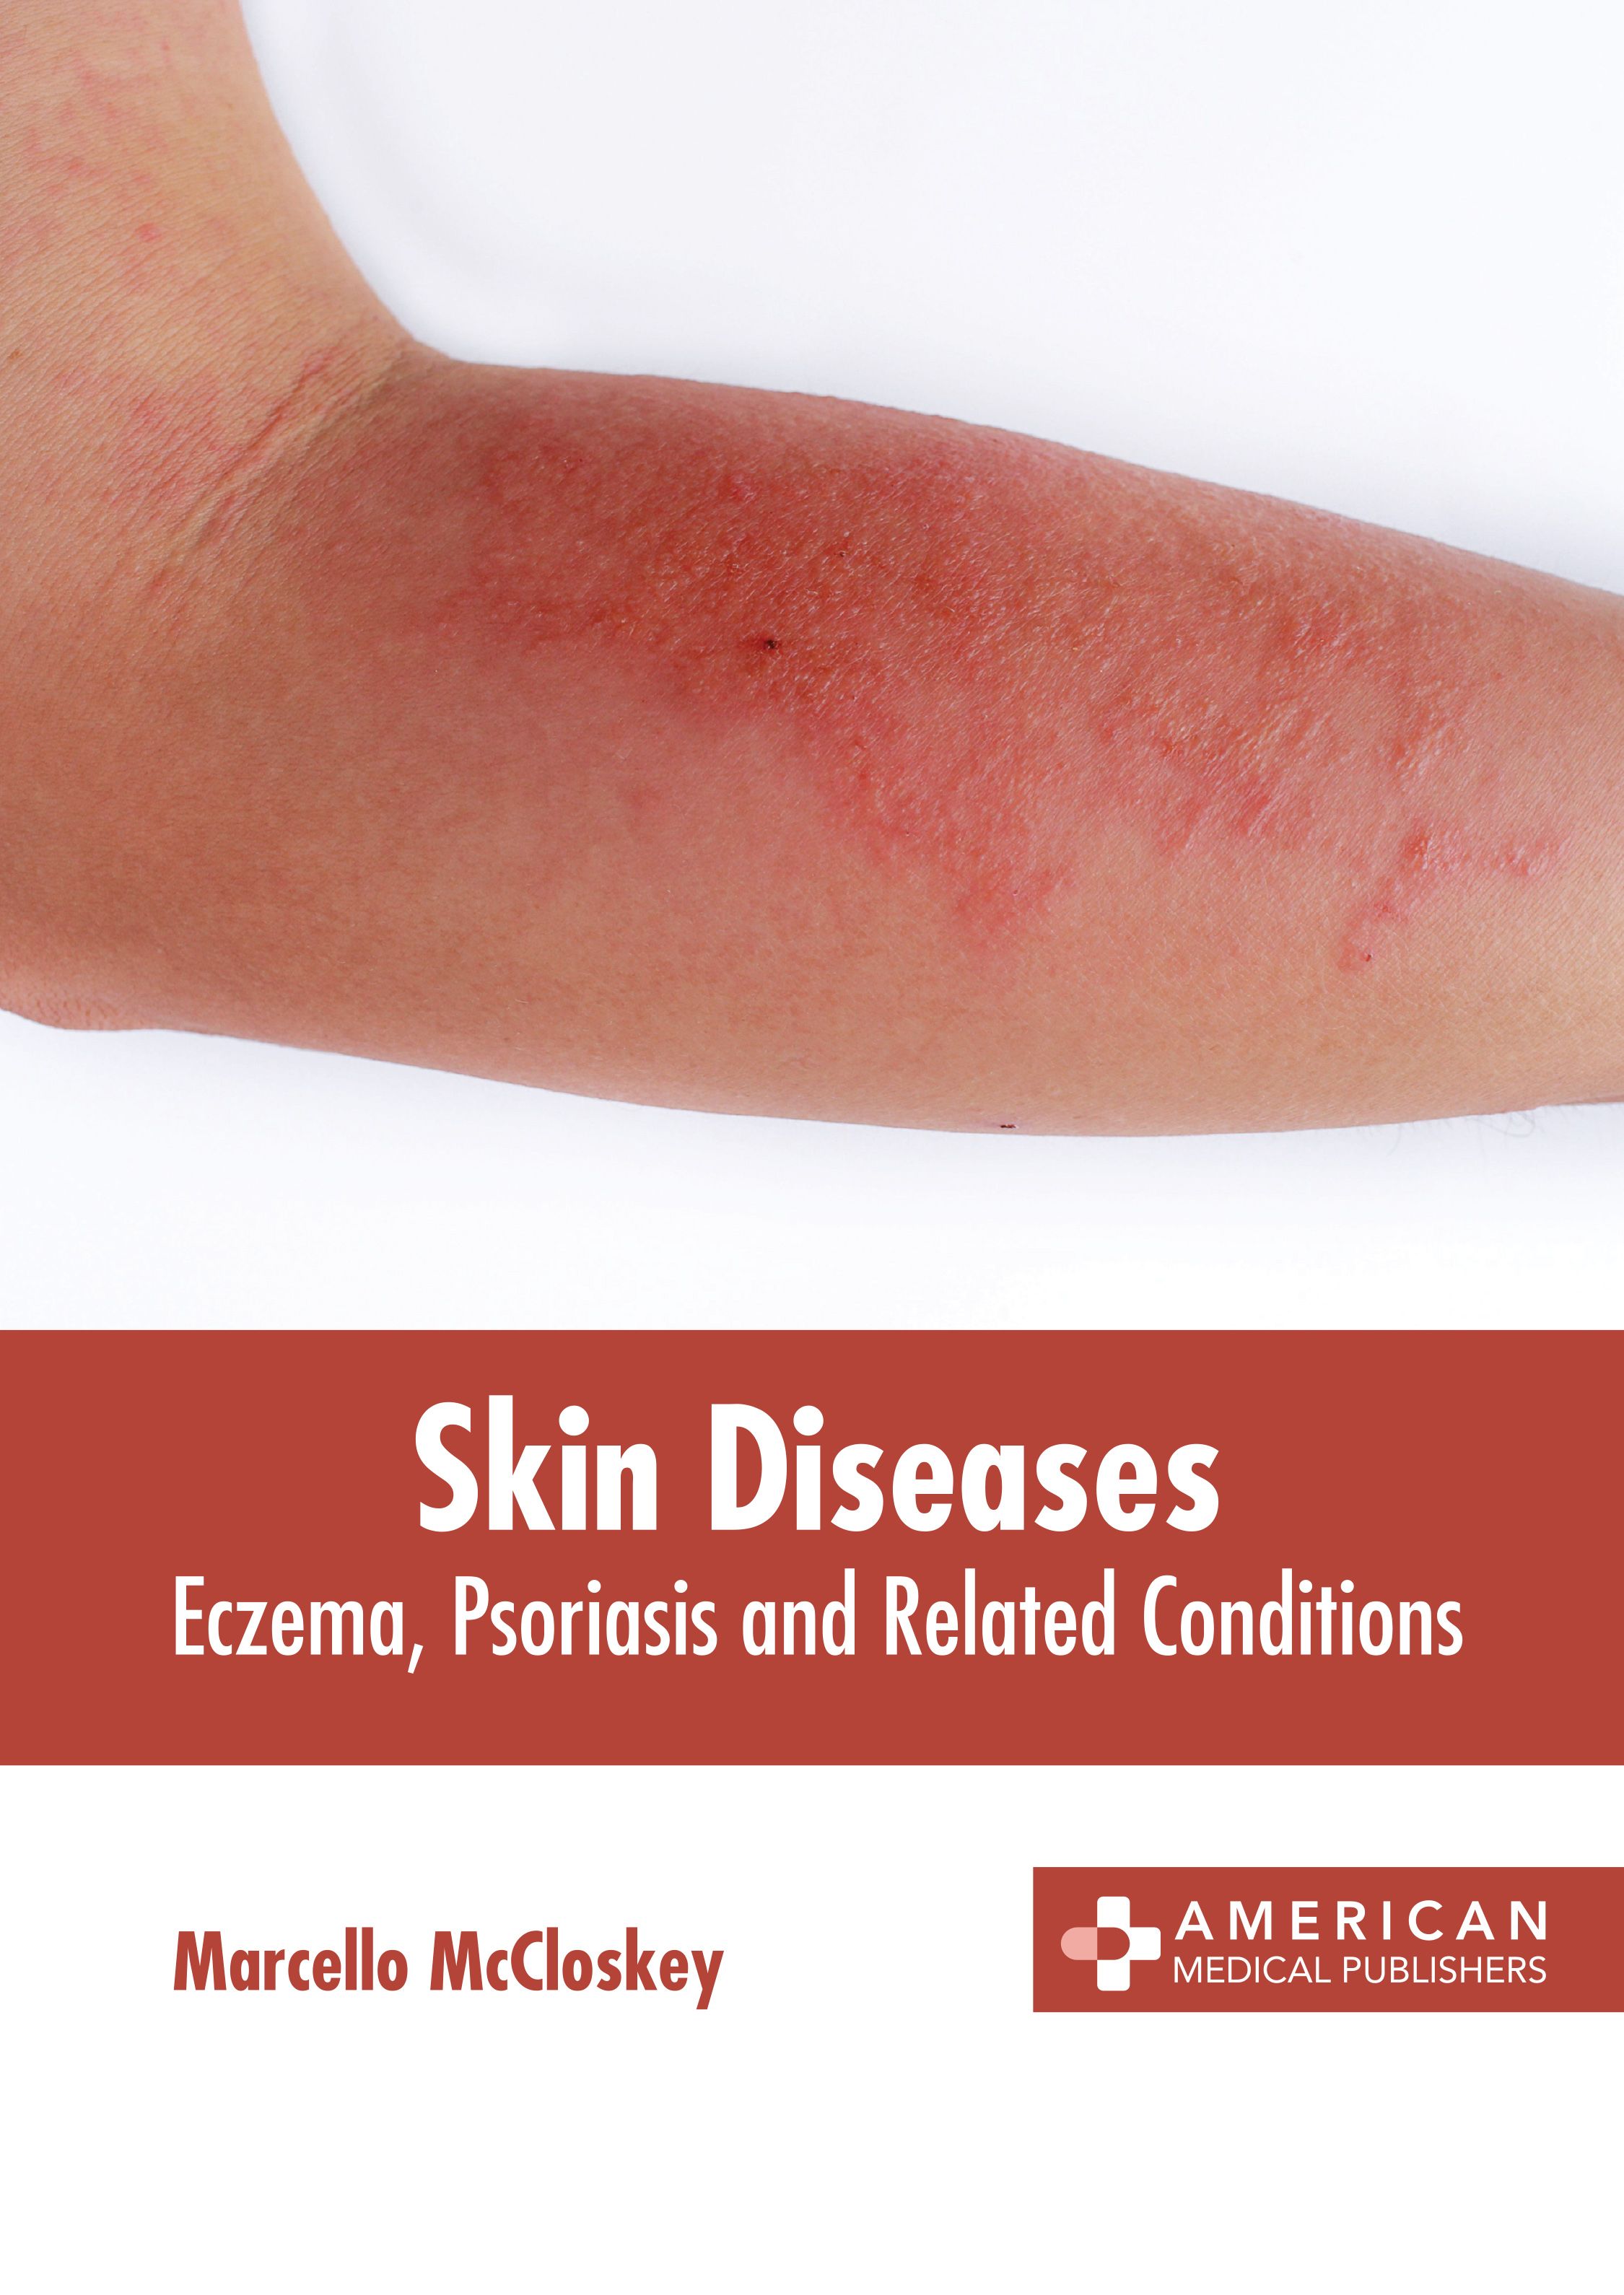 SKIN DISEASES: ECZEMA, PSORIASIS AND RELATED CONDITIONS